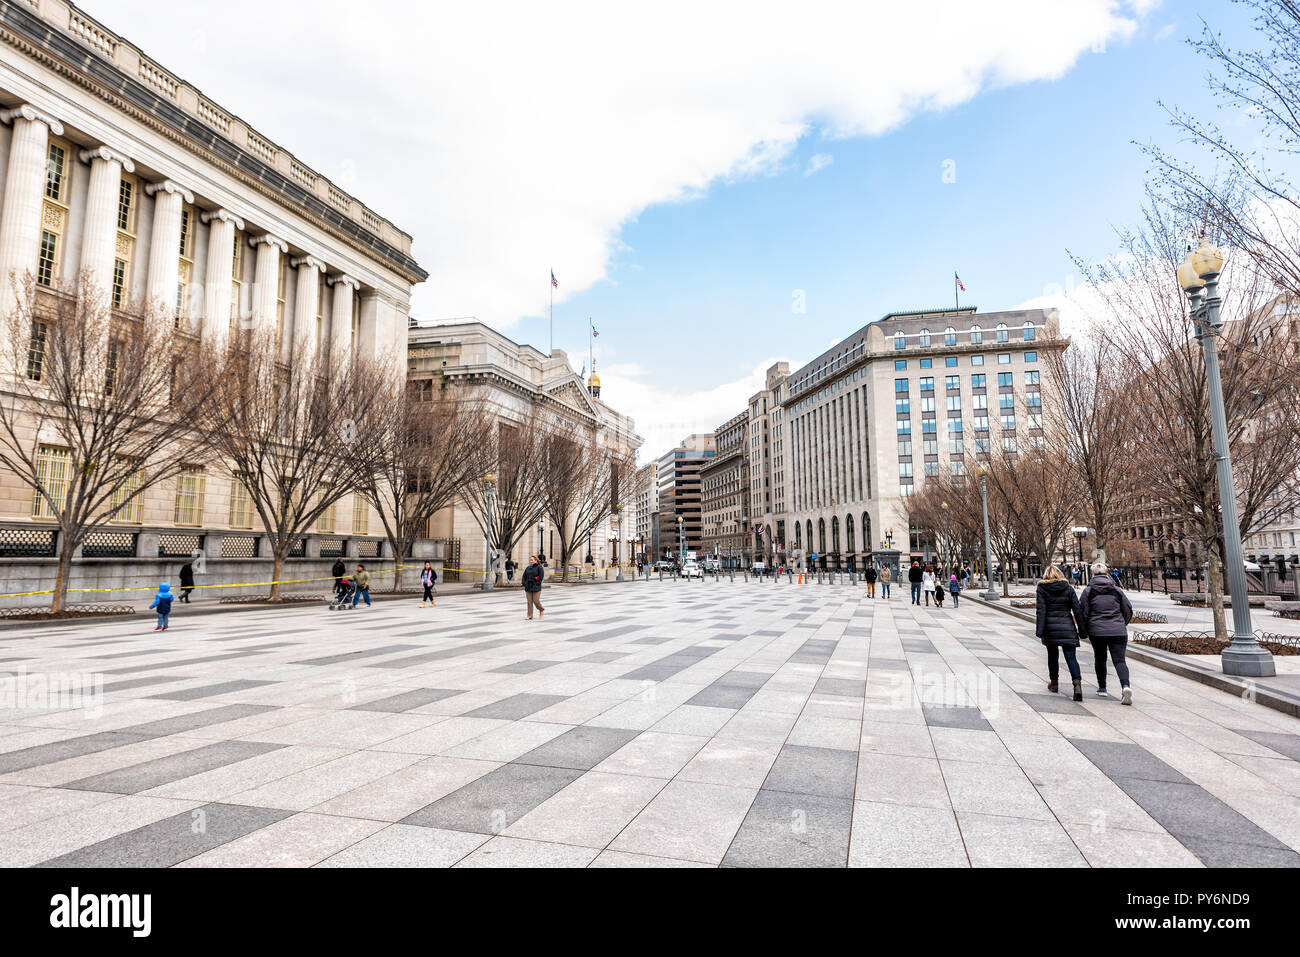 Washington DC, USA - March 9, 2018: Pennsylvania avenue during day in winter or spring, square with people, exterior architecture on national mall, De Stock Photo